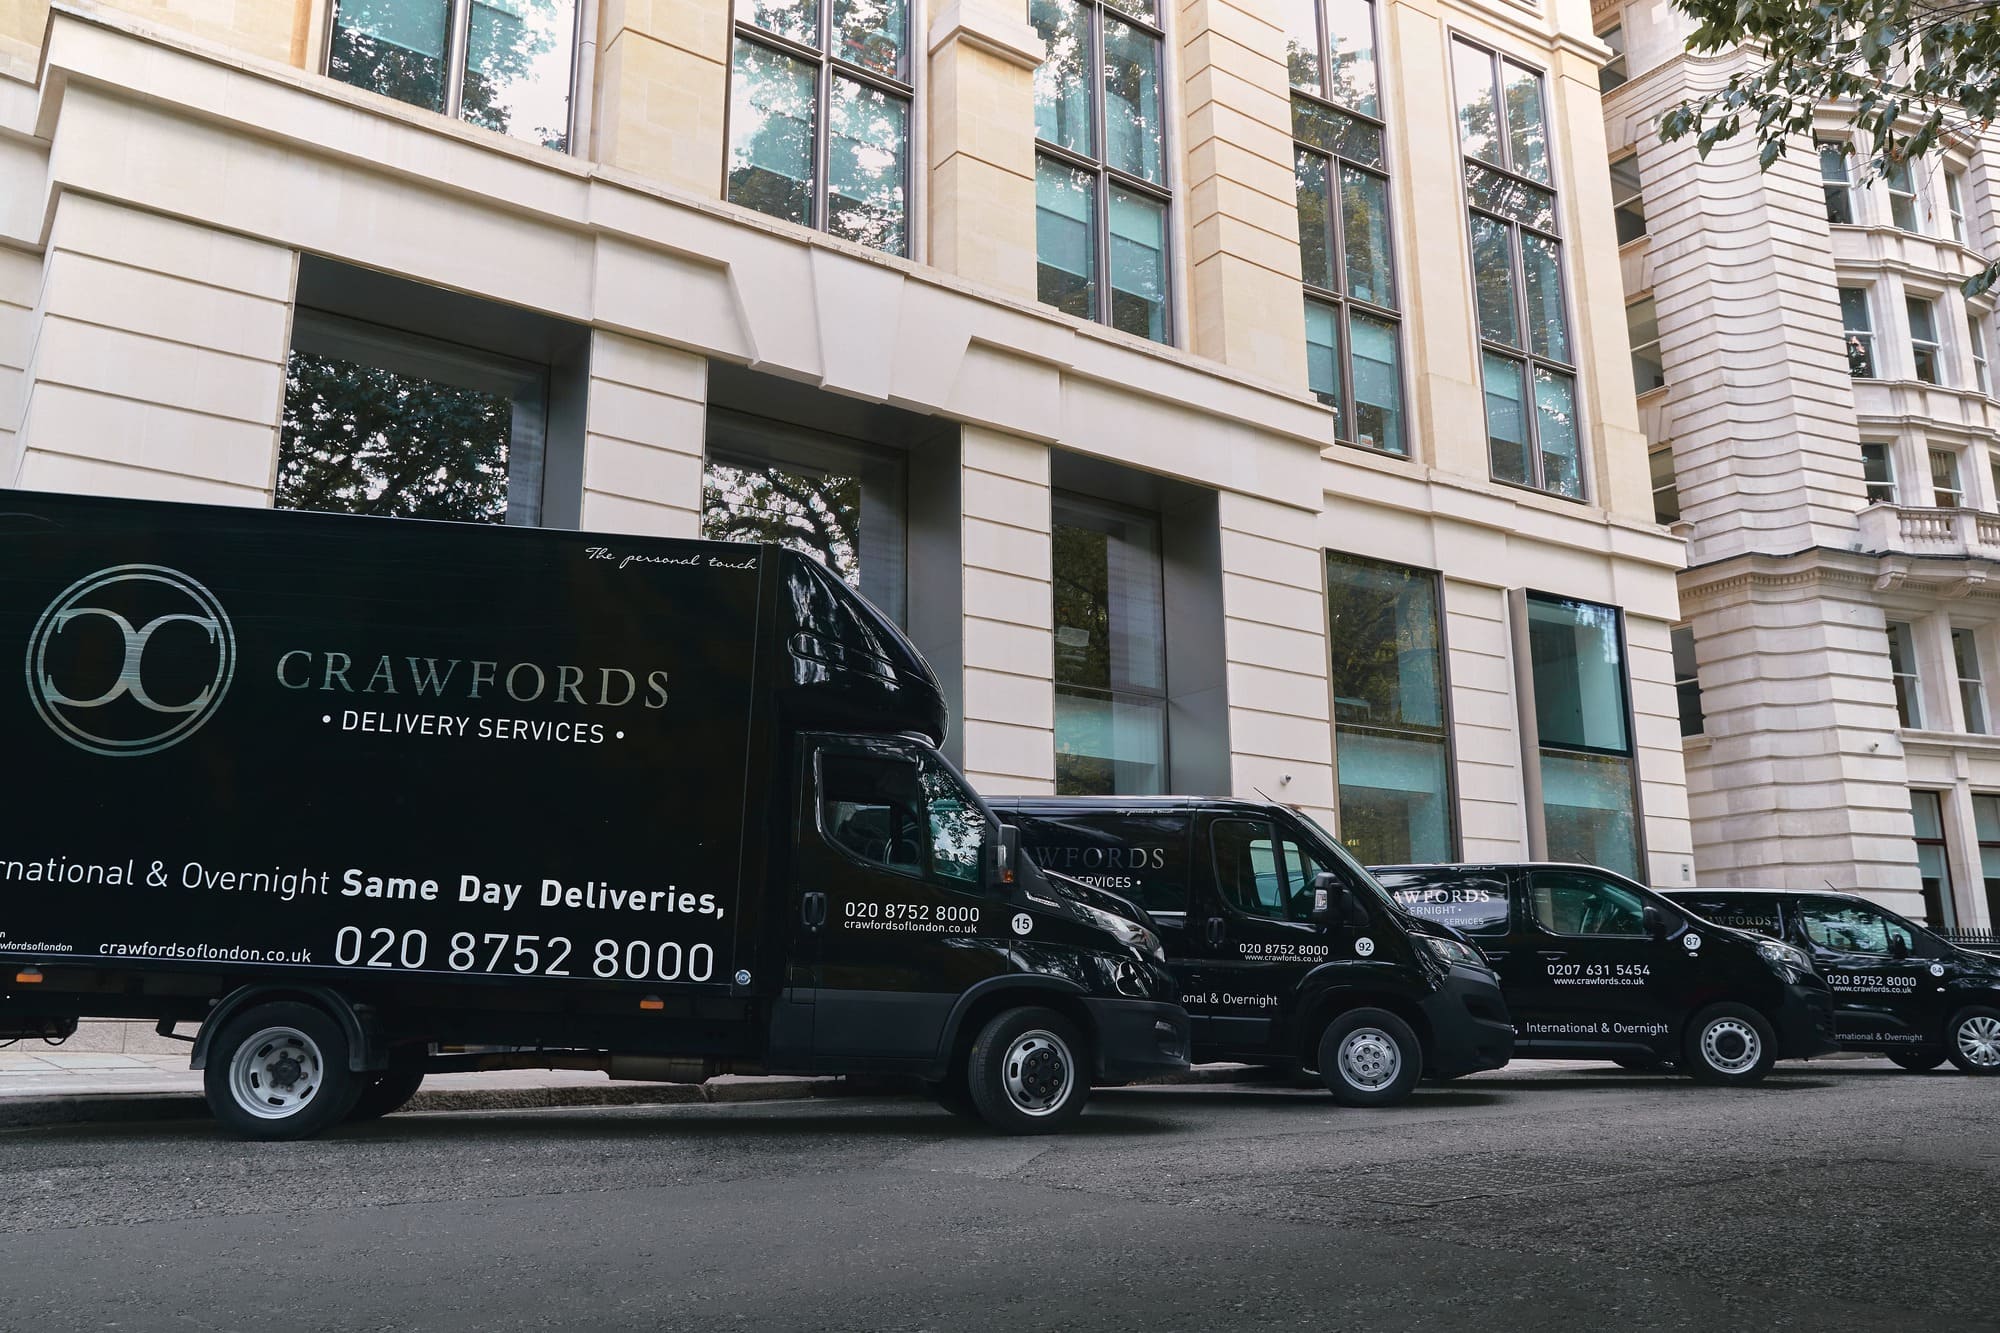 Same Day Deliveries Courier Services - Crawfords Delivery Services in London